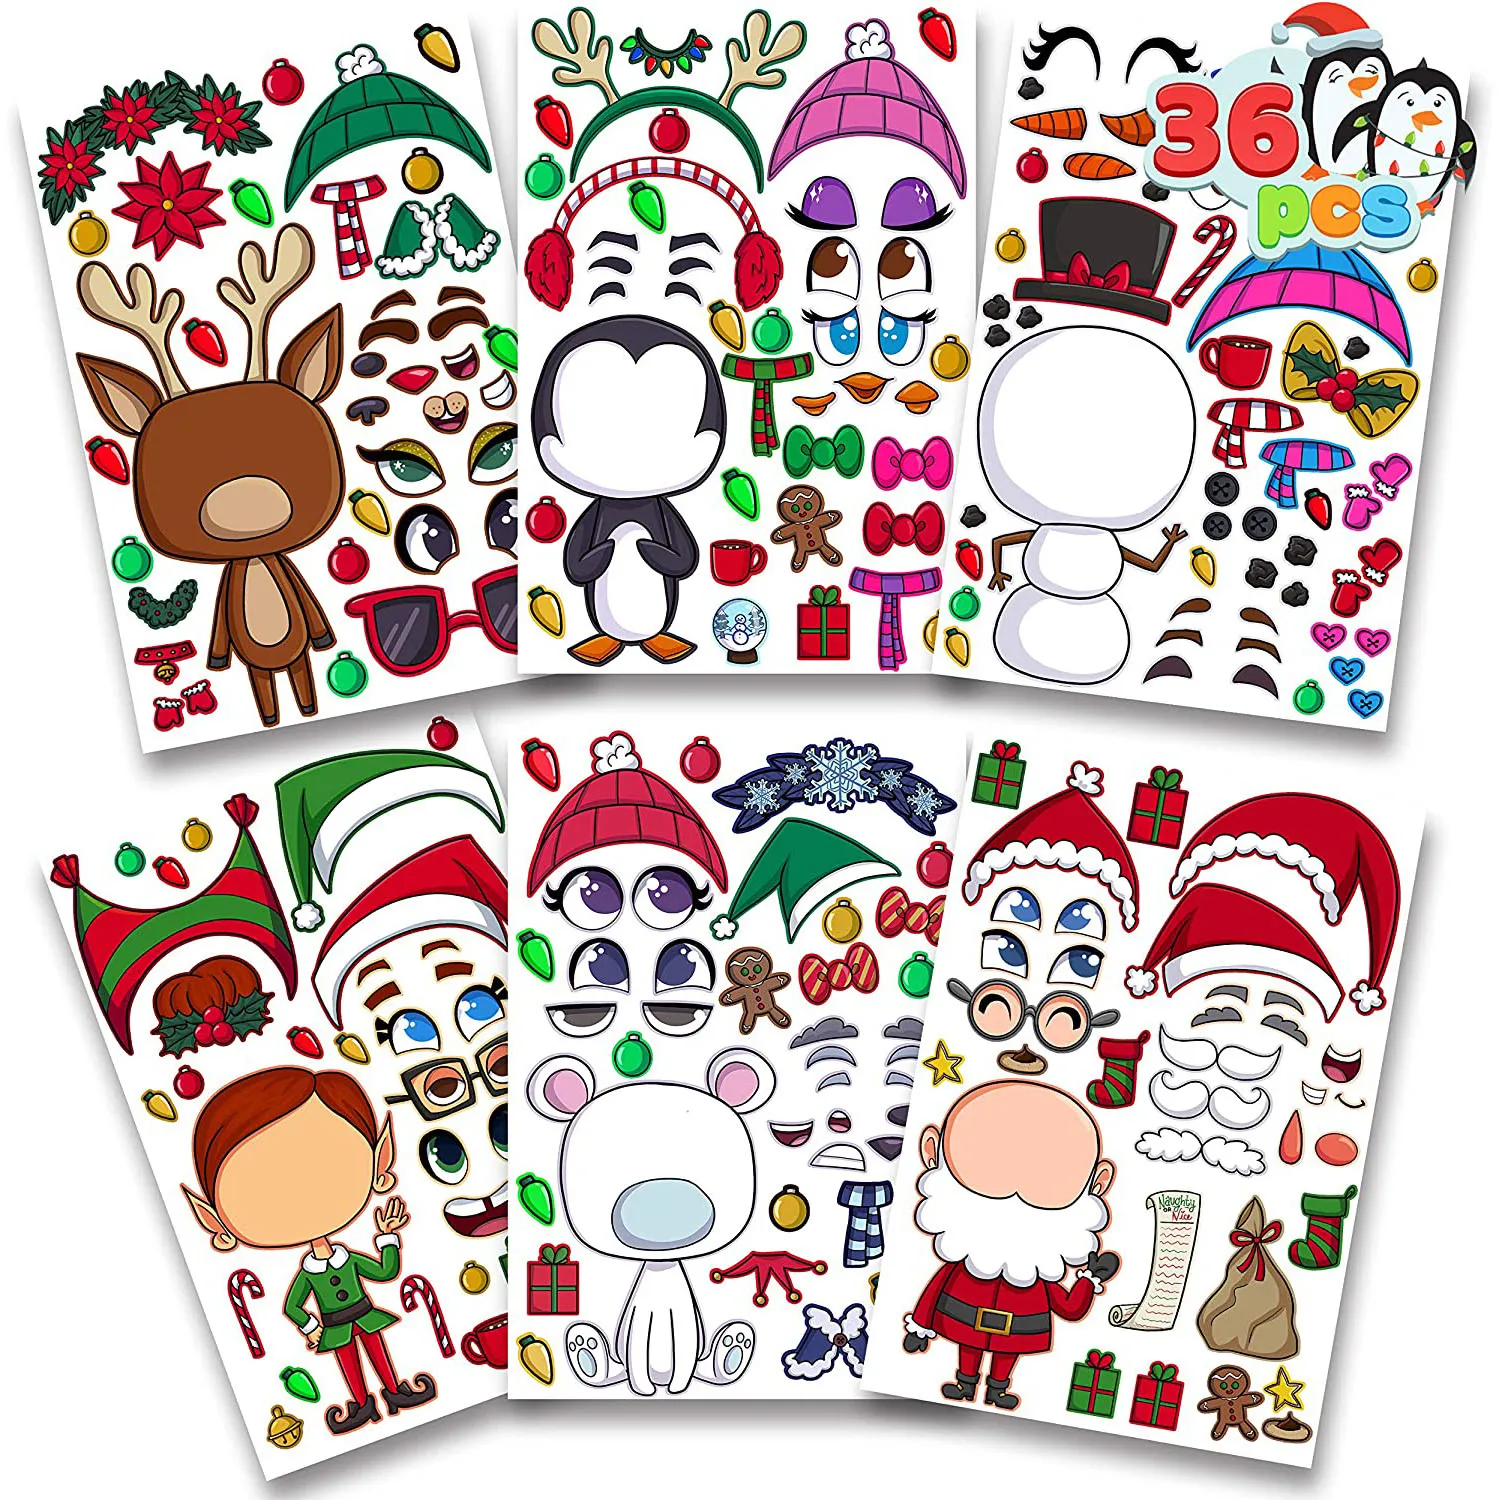 36 Pcs Make-a-Face Sticker Sheets Make Your Own Christmas Characters Mix and Match Sticker Sheets with Full Body Design Reindeer, Snowman, Elf and M